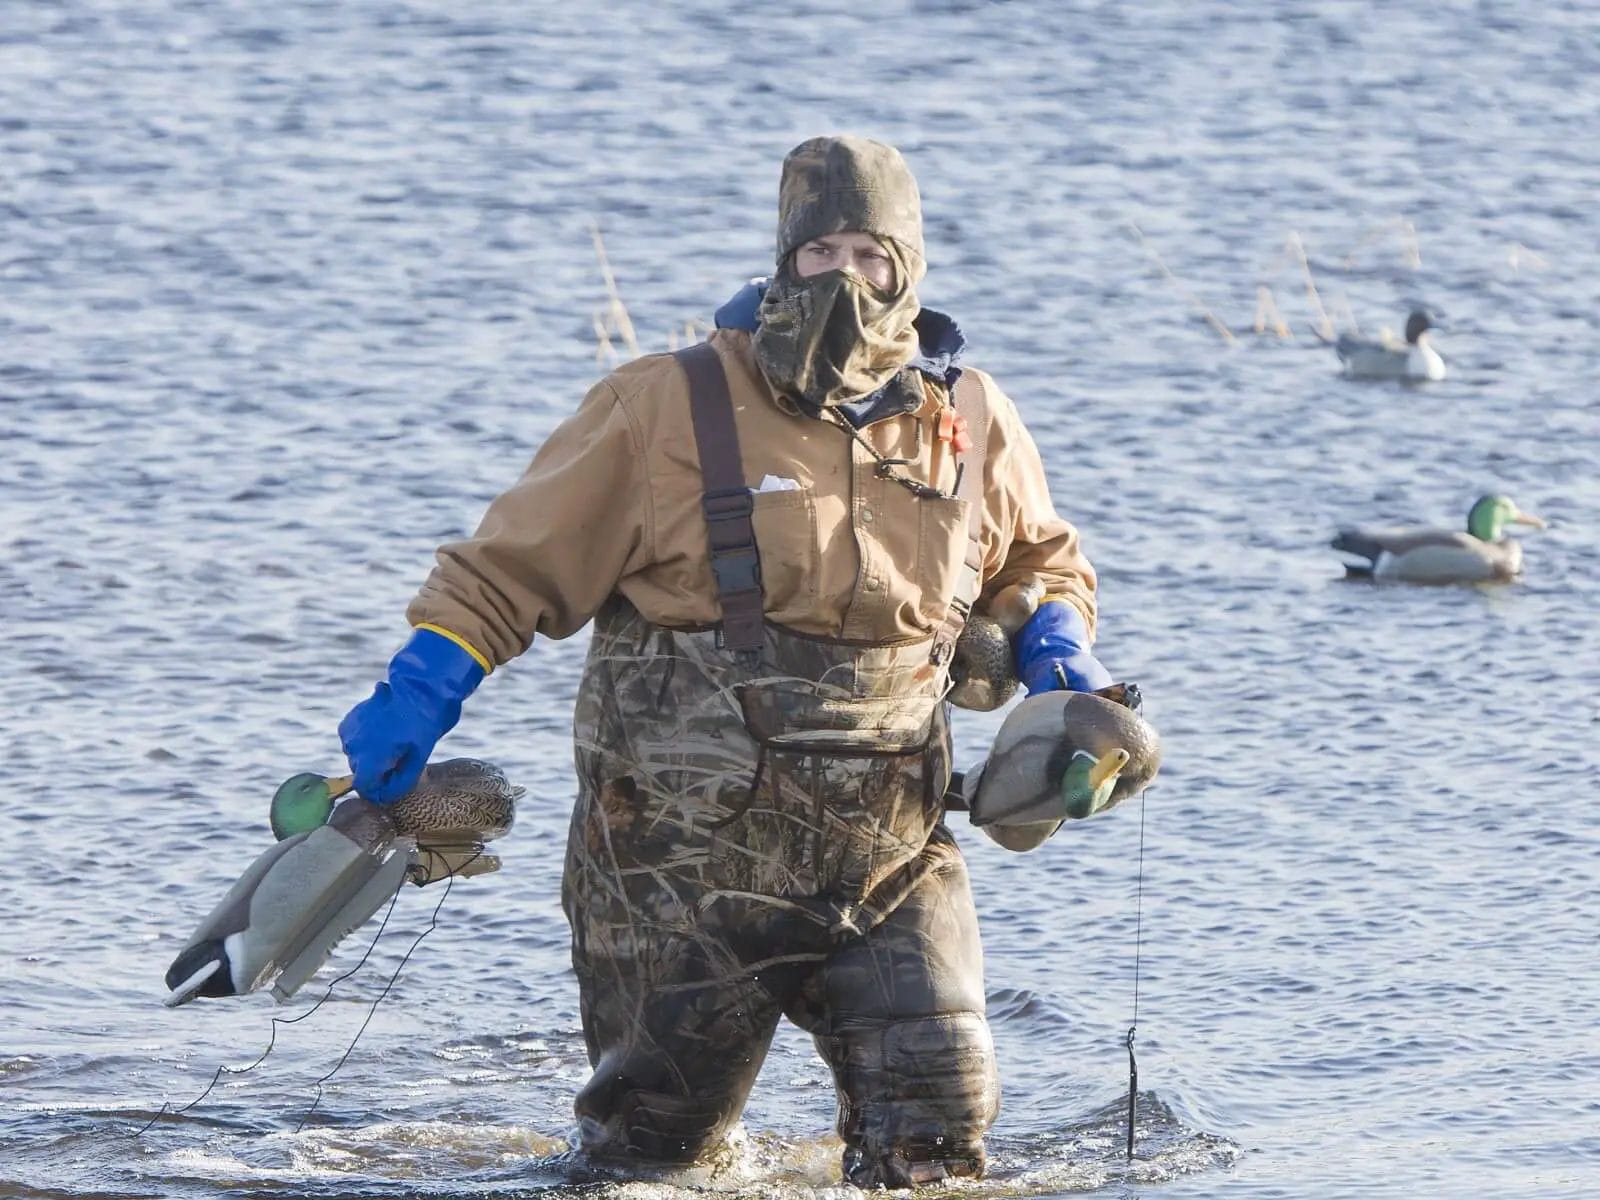 Cold weather duck hunting with insulated waders and full face covering